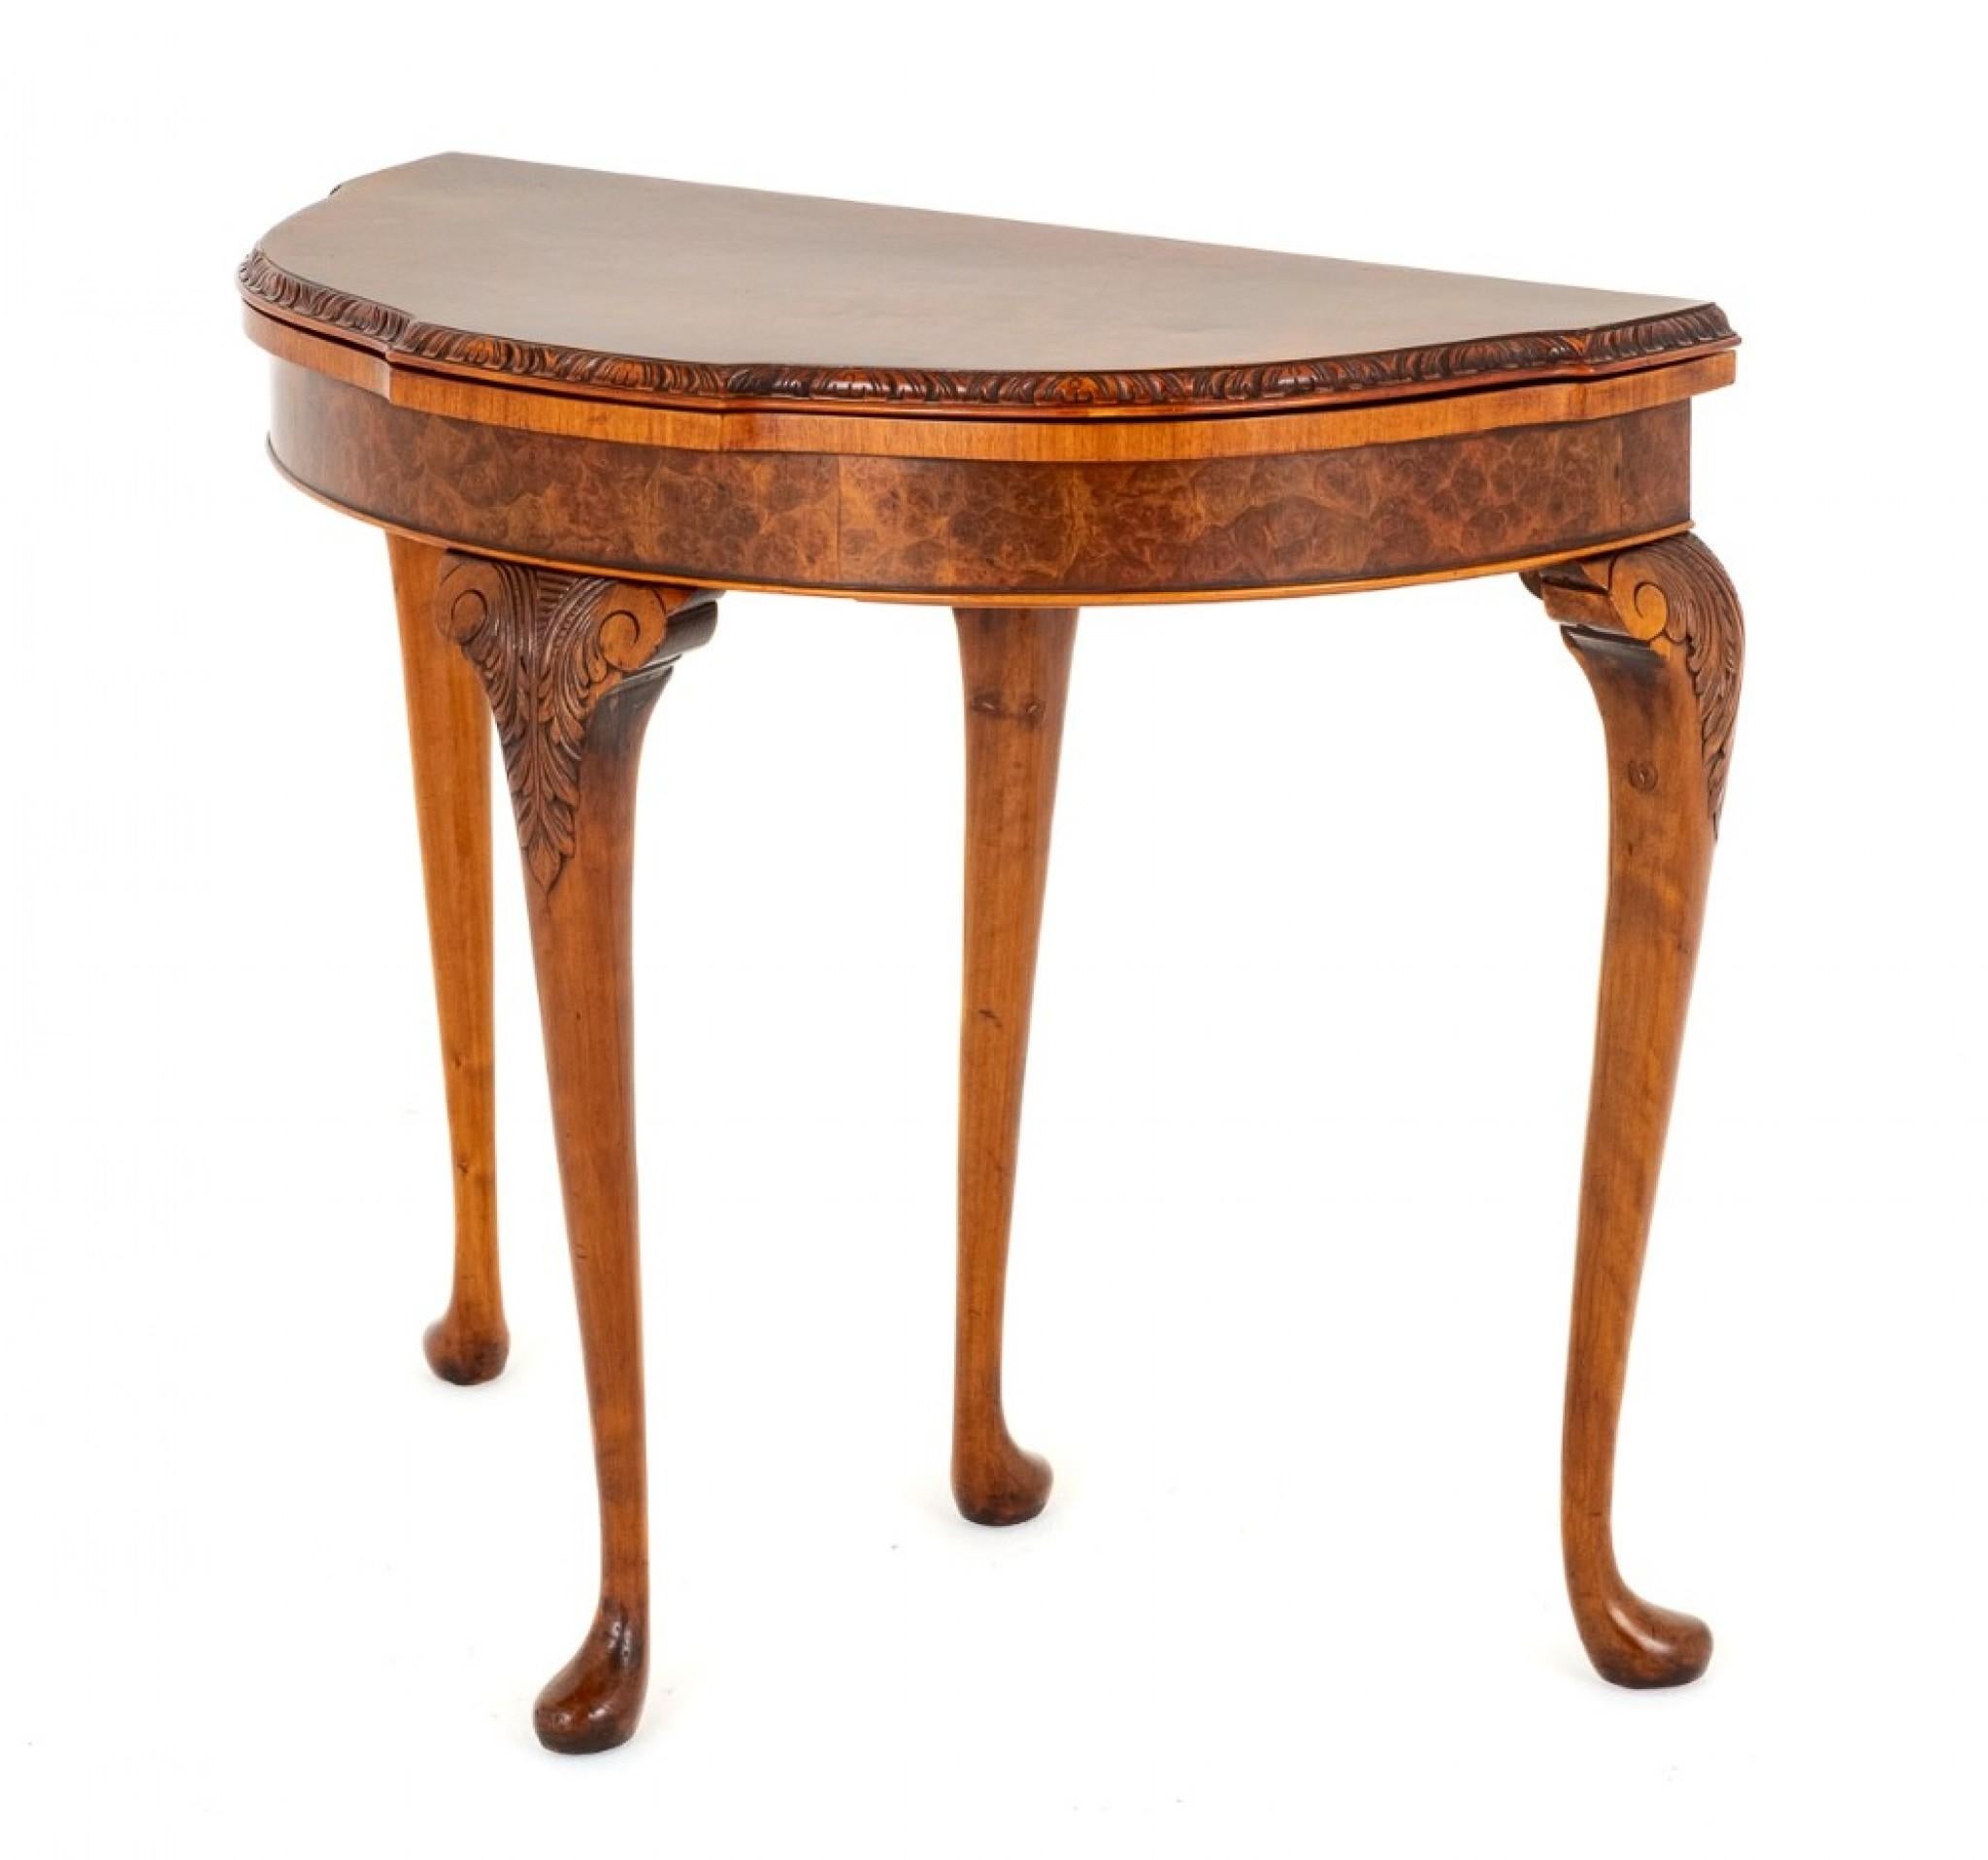 Burr Walnut Queen Anne Style Card Table.
Circa 1920
This Card Table is Raised Upon Shaped Legs With Carved Knees and Pad Feet.
The Frieze and Top of the Table Featuring The Best Quality Burr Walnut Veneers.
The Rear Leg Pulls out to Reveal a Drawer